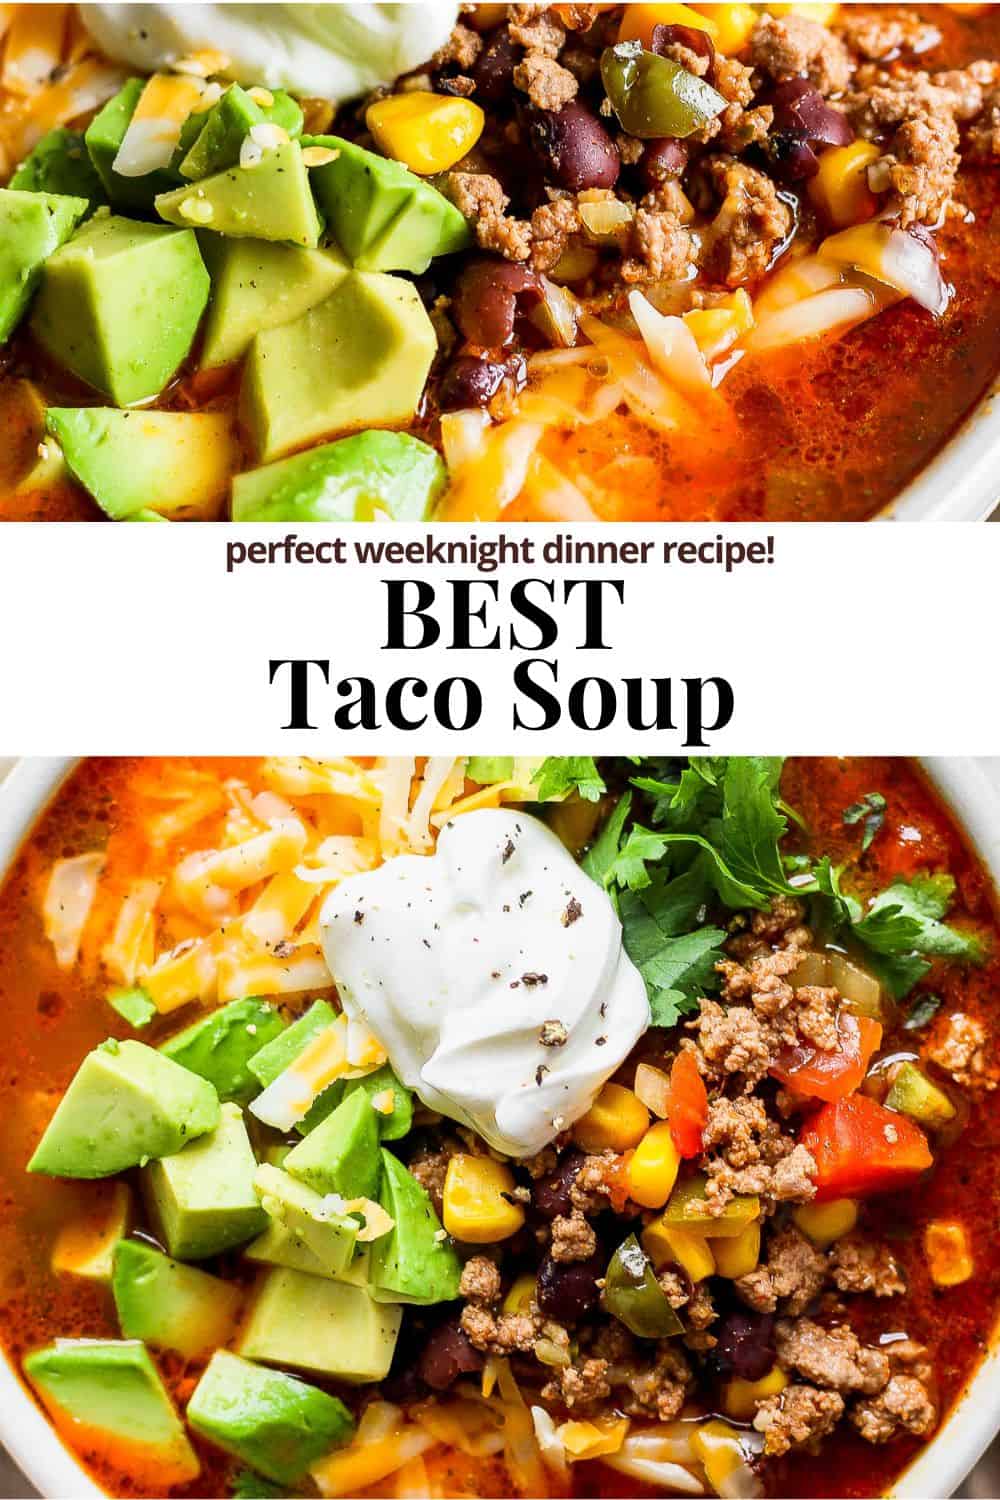 Pinterest image showing taco soup in a bowl with the title "Best taco soup. Perfect weeknight dinner recipe."